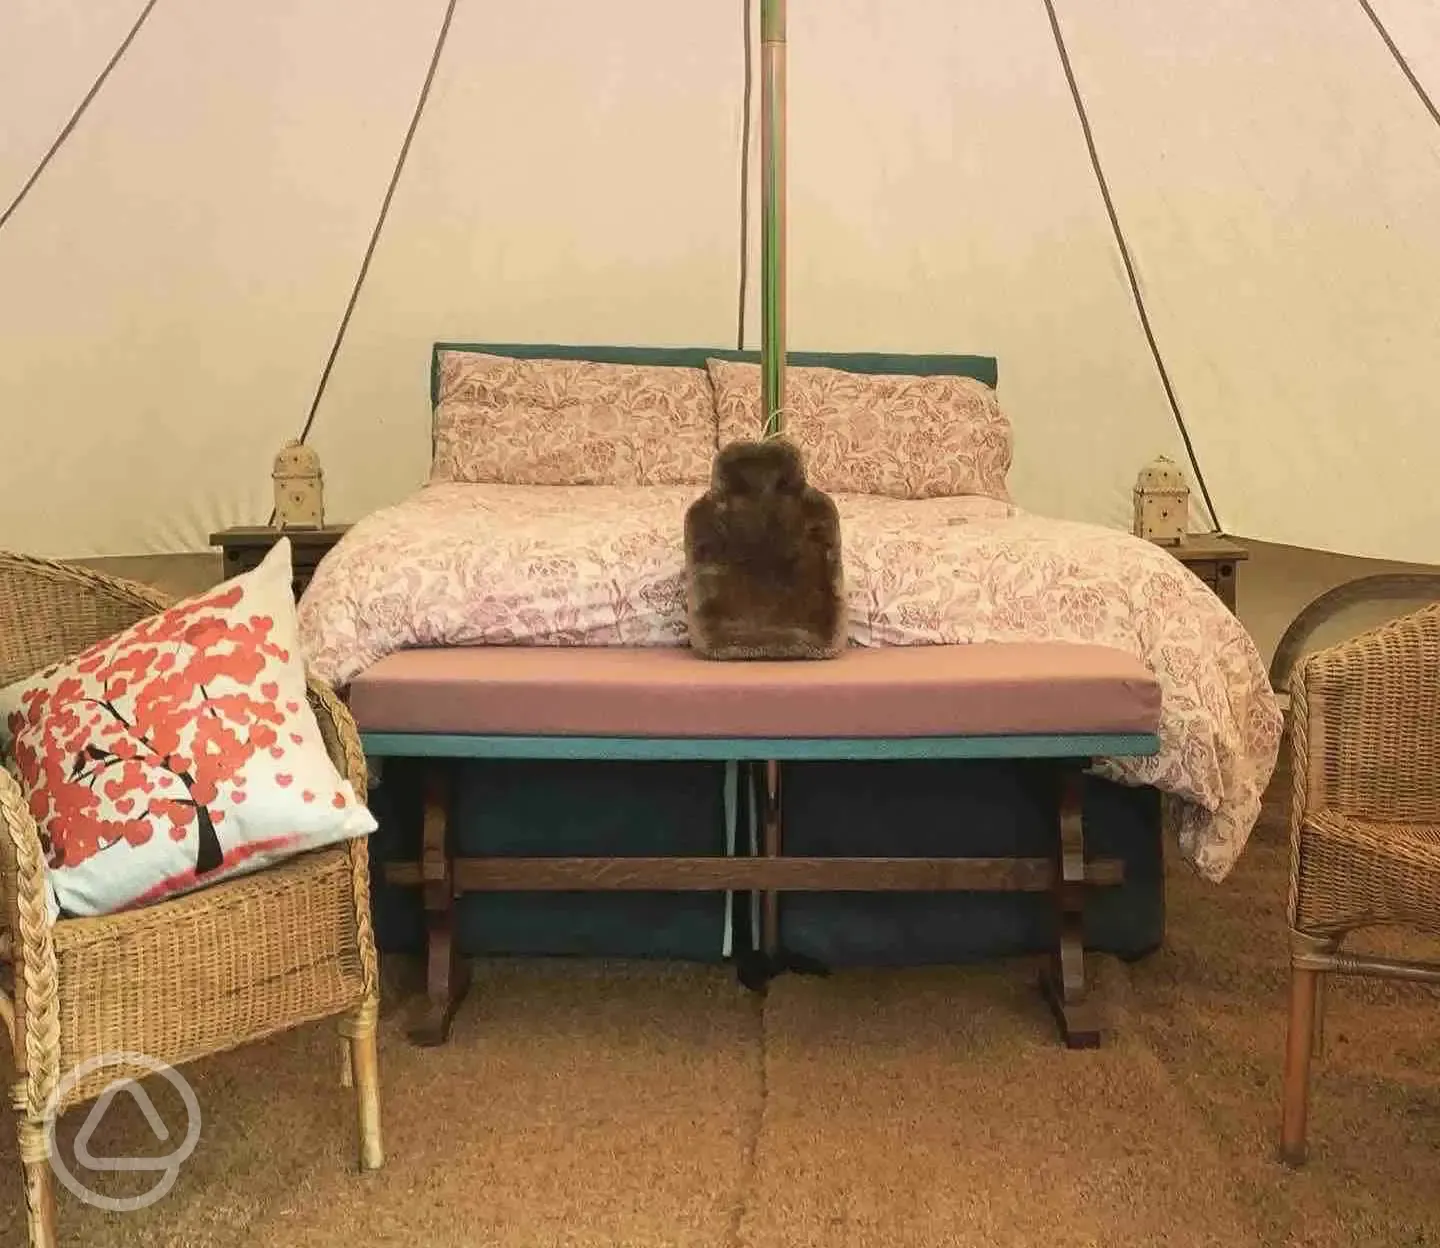 Bell tent bed